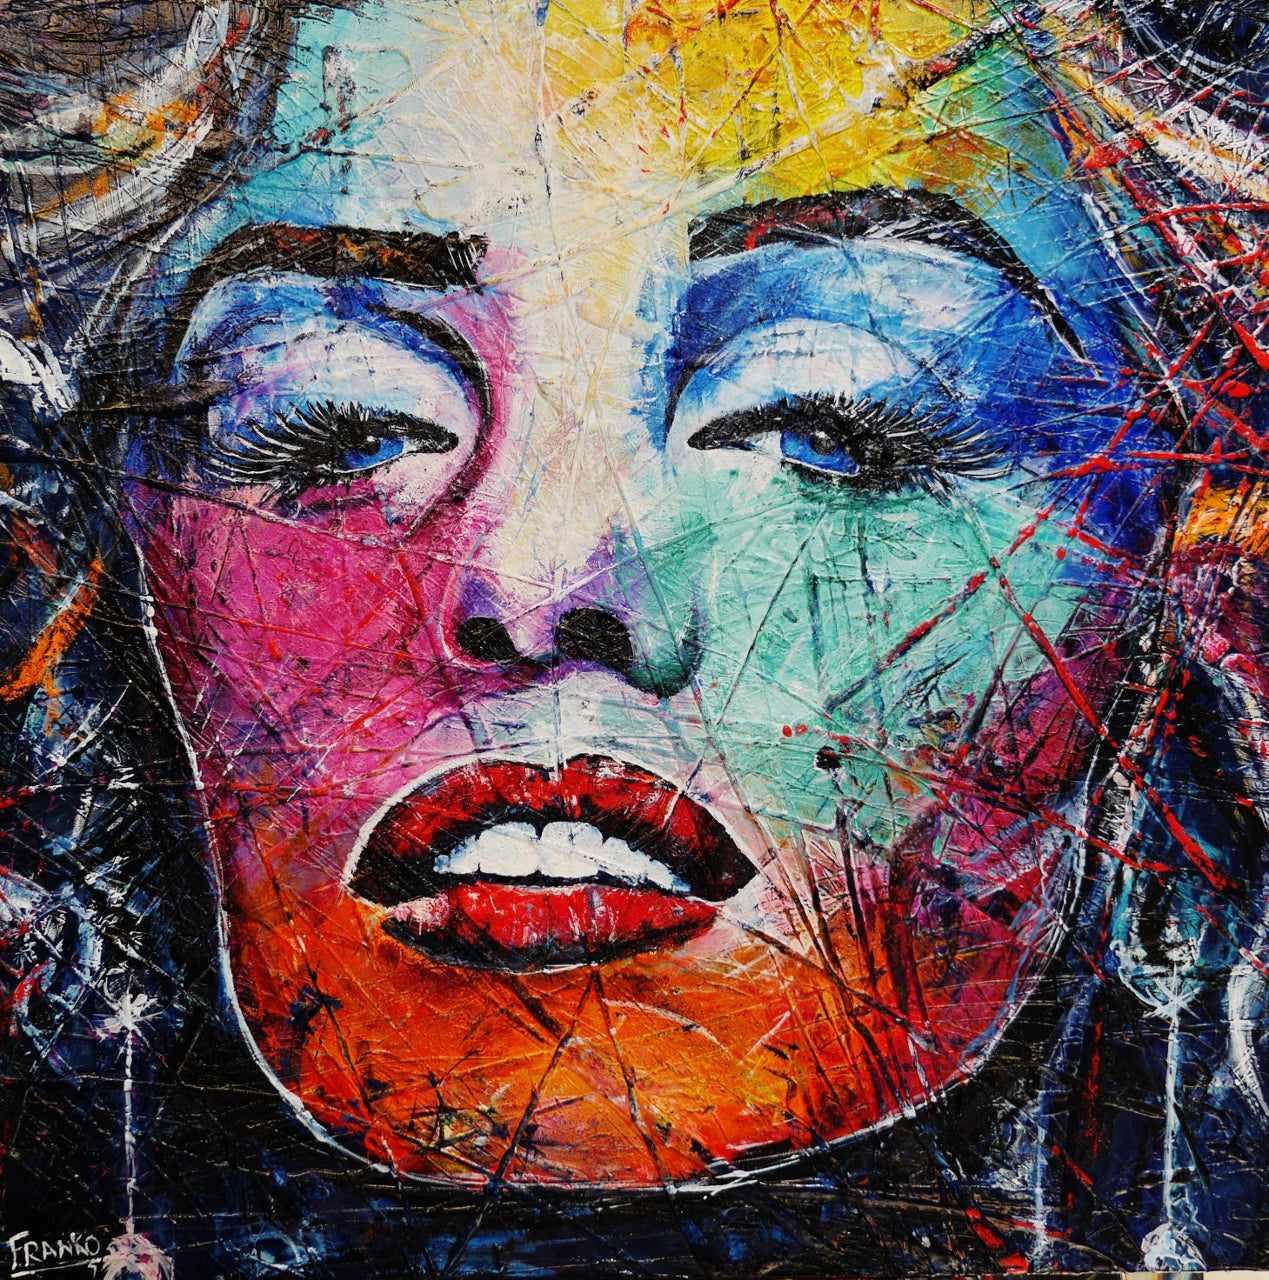 Miss M (M is for Marvelous) 120cm x 120cm Marilyn Monroe Abstract Realism Urban Pop Texture Painting (SOLD)-abstract realism-Franko-[Franko]-[Australia_Art]-[Art_Lovers_Australia]-Franklin Art Studio